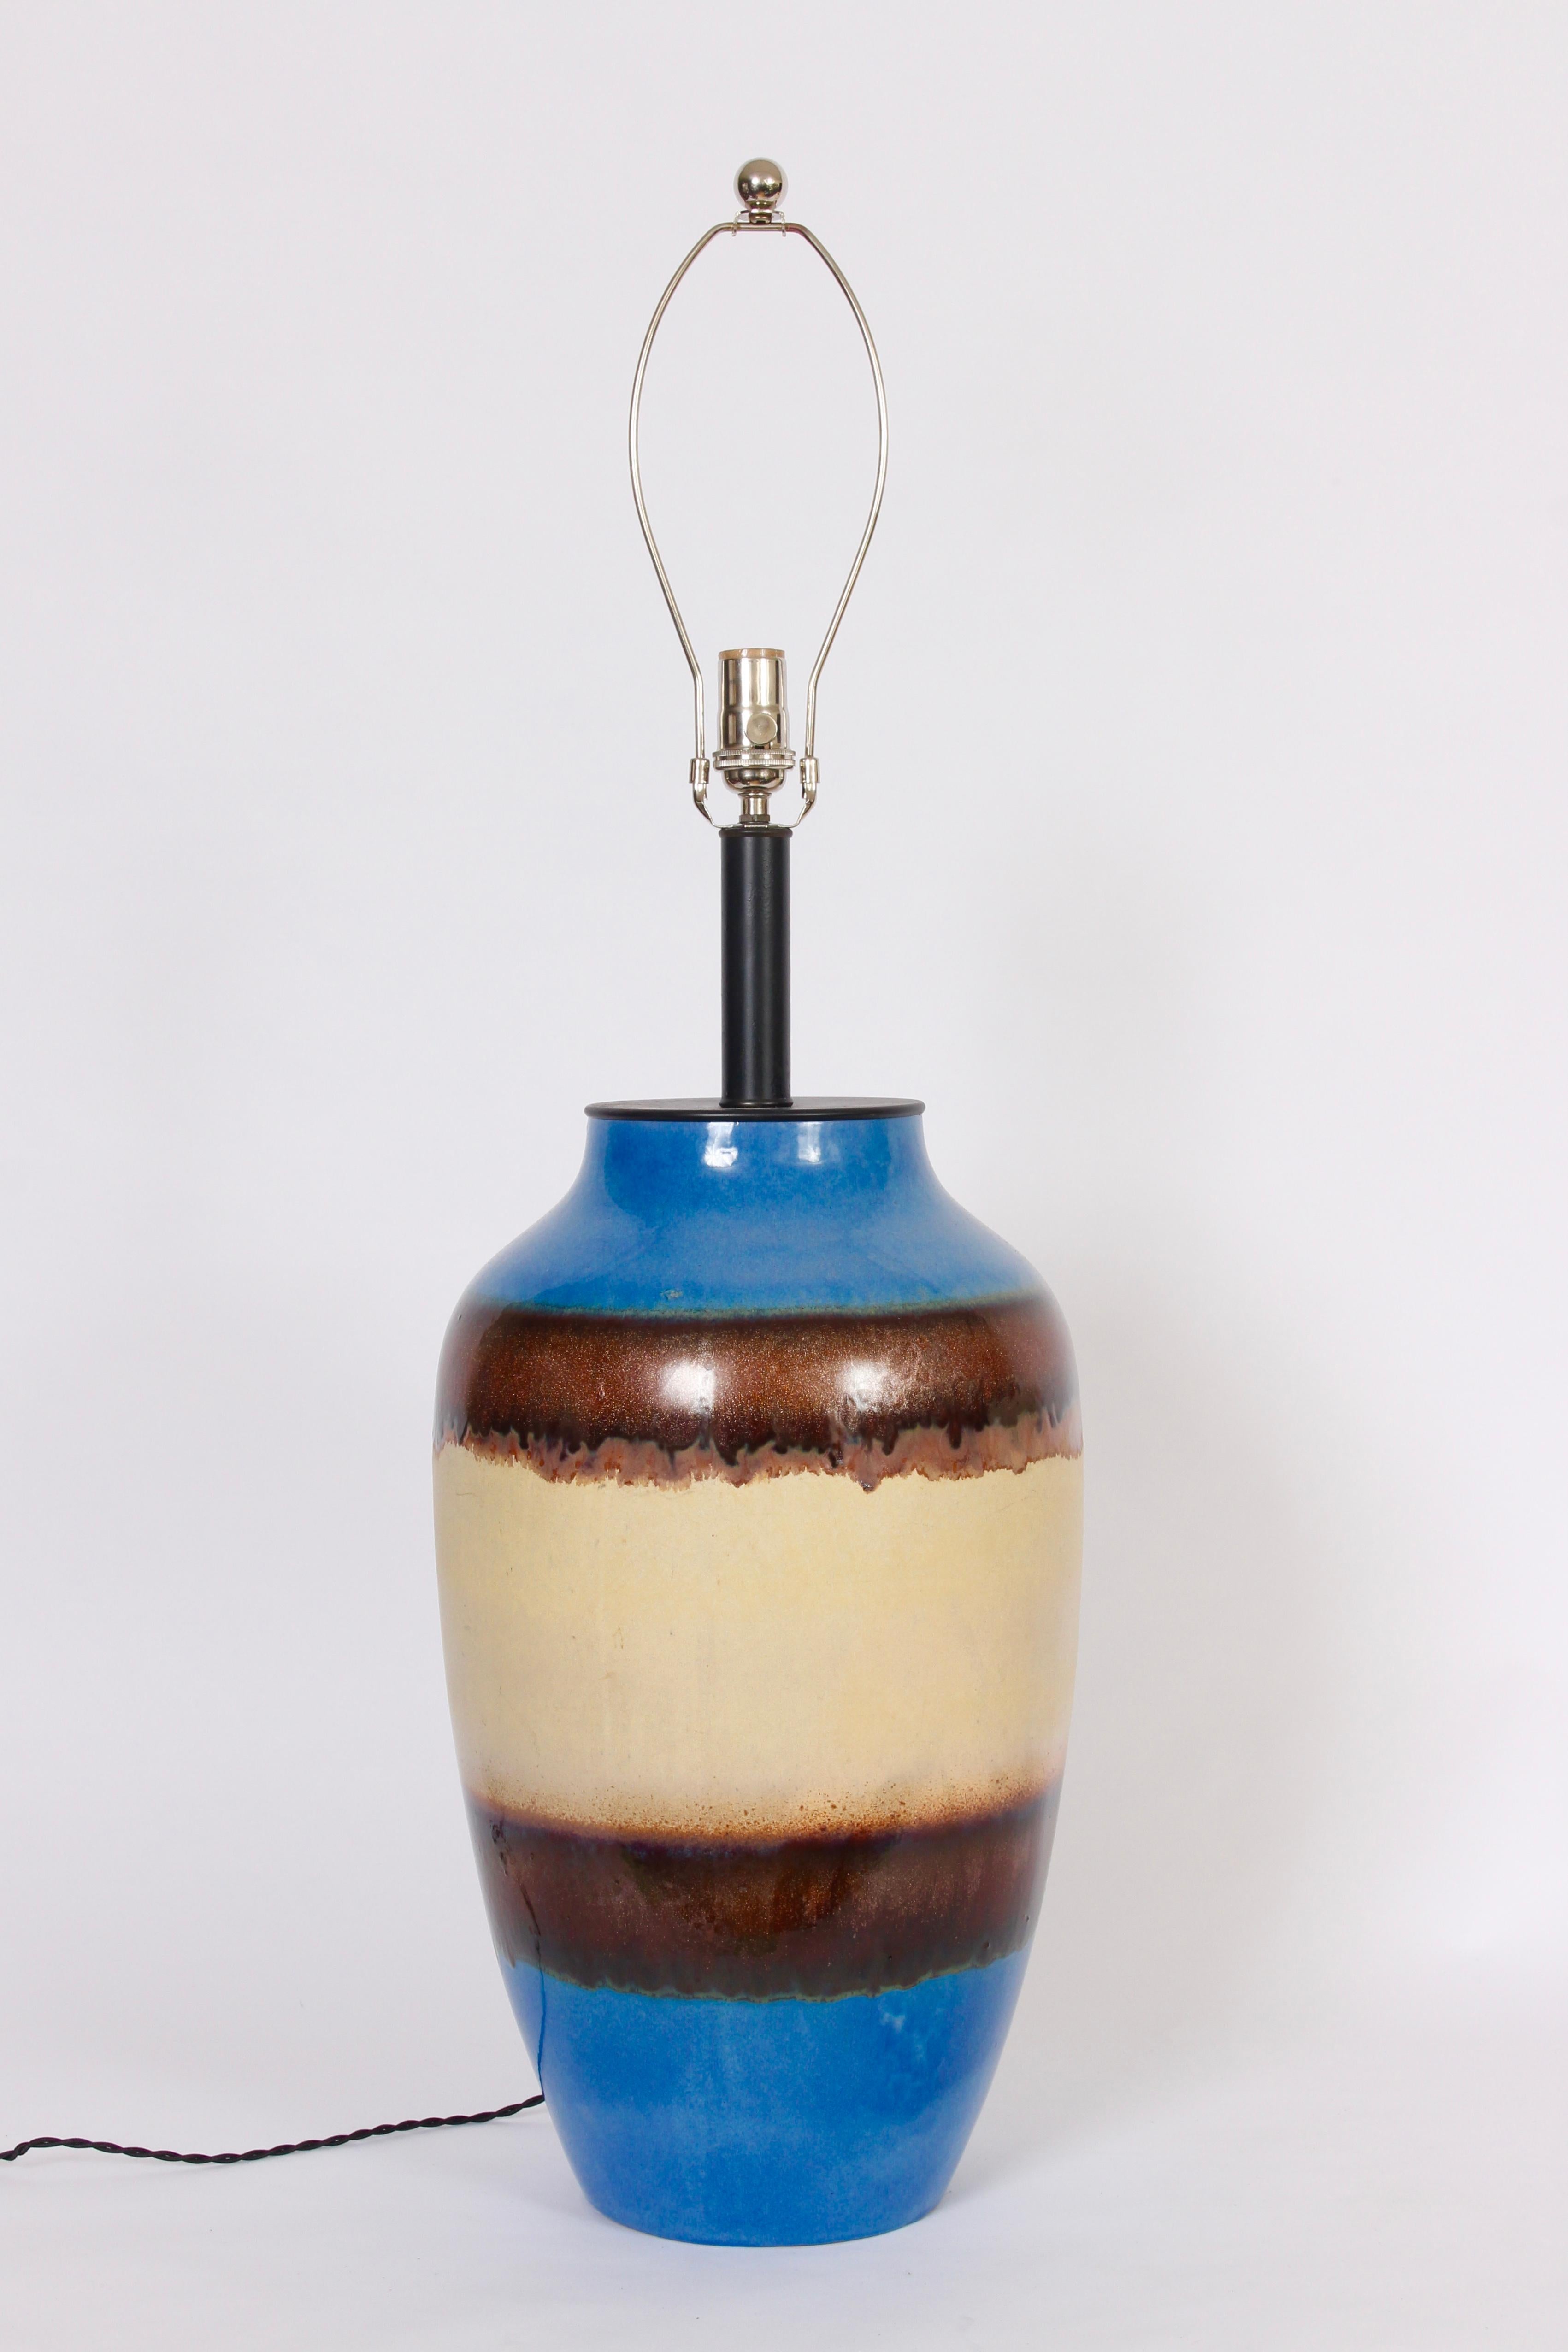 Monumental Raymor, three foot high, blue, copper and cream ceramic table lamp, from the 1960s. Featuring a large oil jar form handcrafted with reflective horizontal drip glaze in blue, beige, copper and rust. Black neck and cap. Shade shown for